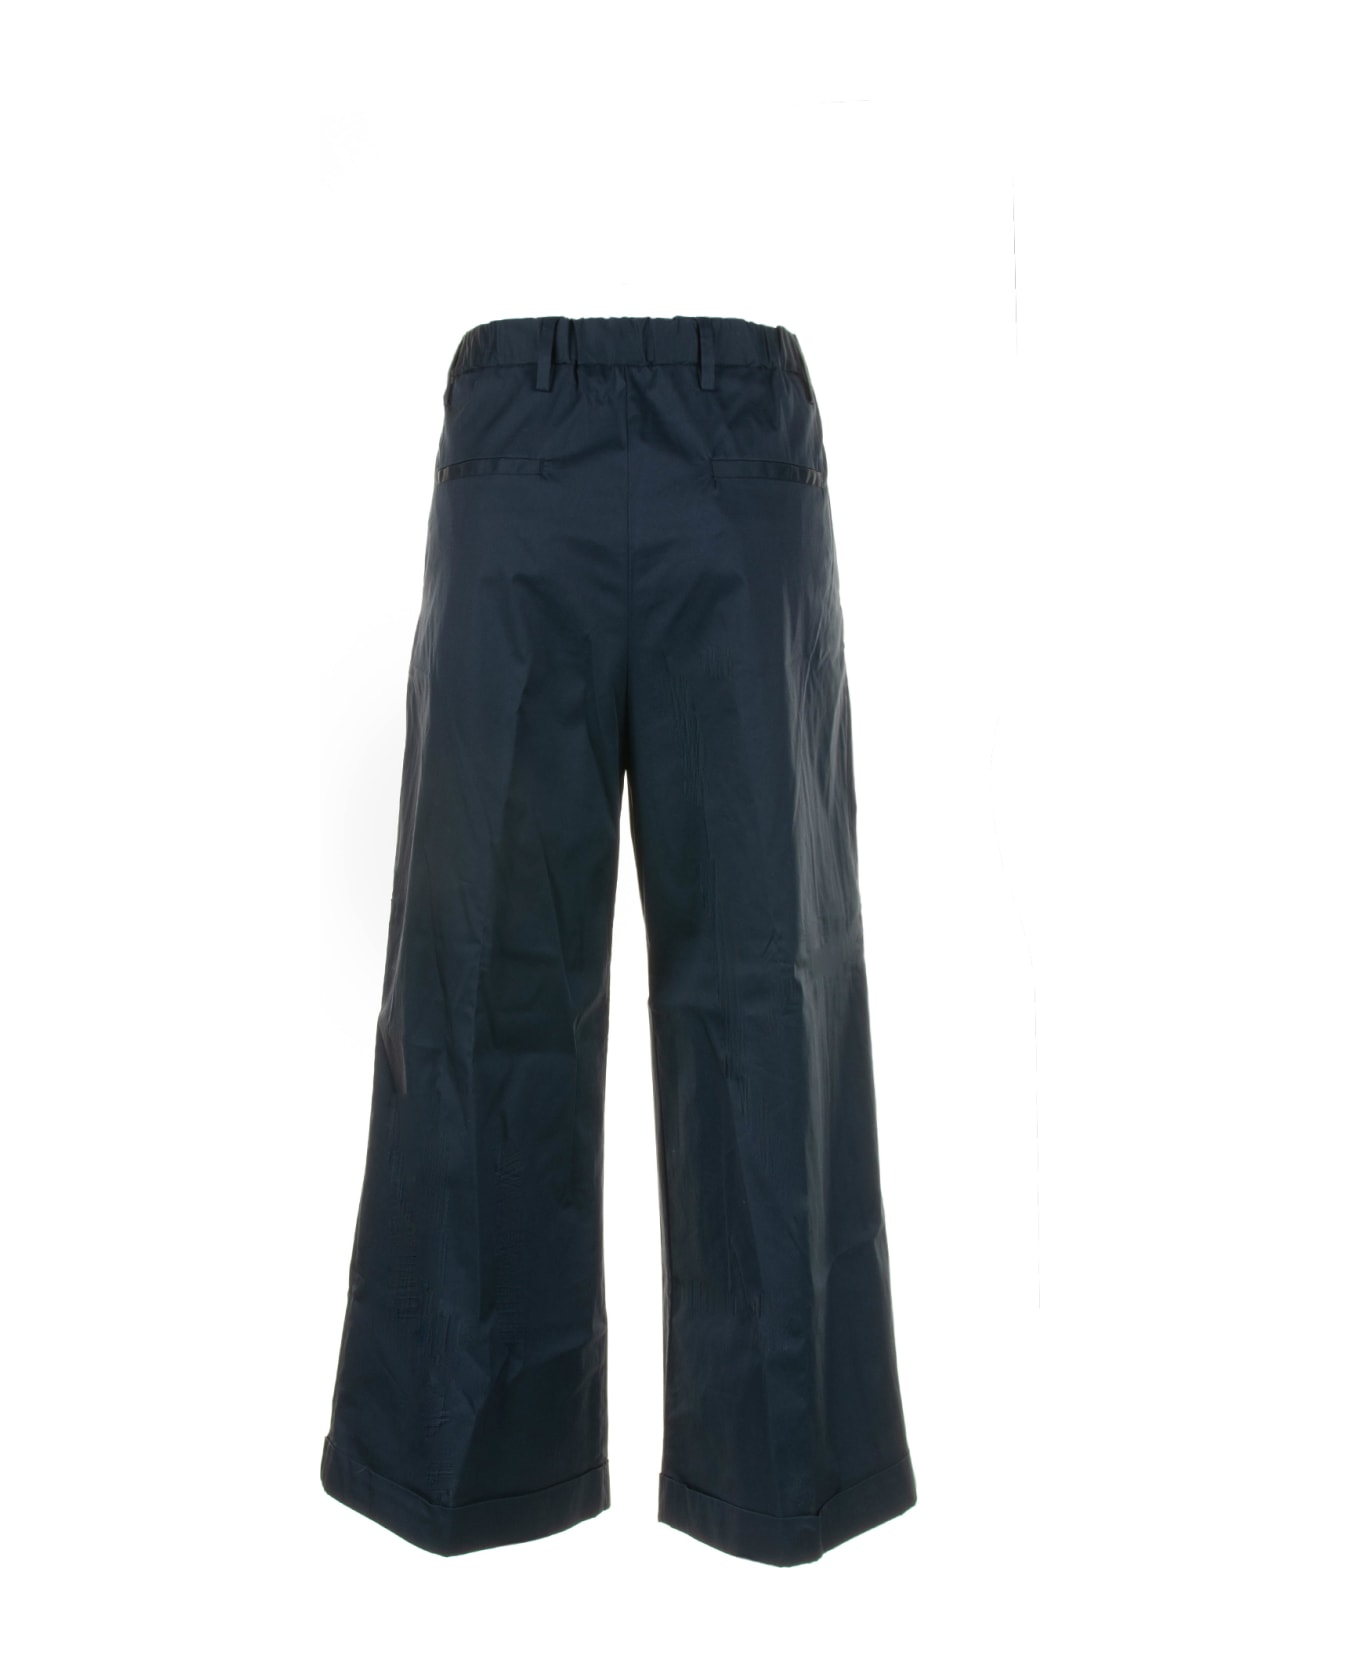 Myths High-waisted Wide Leg Trousers - BLU NAVY ボトムス